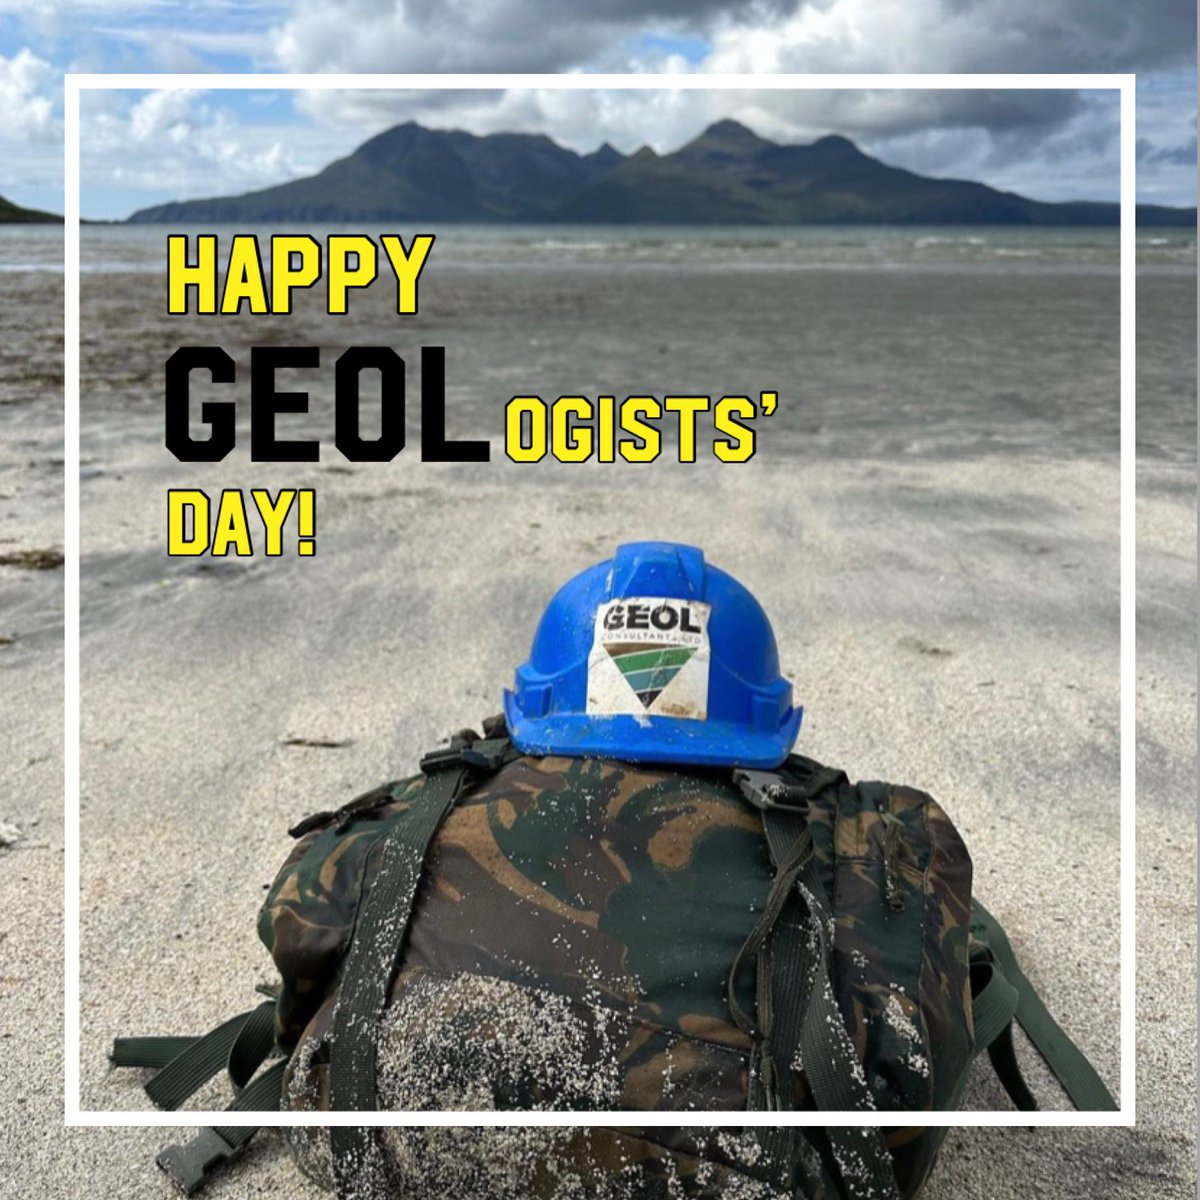 Hᴀᴘᴘʏ GEOLᴏɢɪsᴛs’ Dᴀʏ!

A #celebration to recognise #geologists #geophysicists and #geochemists working around the #world and the contribution they have made to our way of #life 👏⛏

07-04-2024 #geolconsultants #geologist #geology